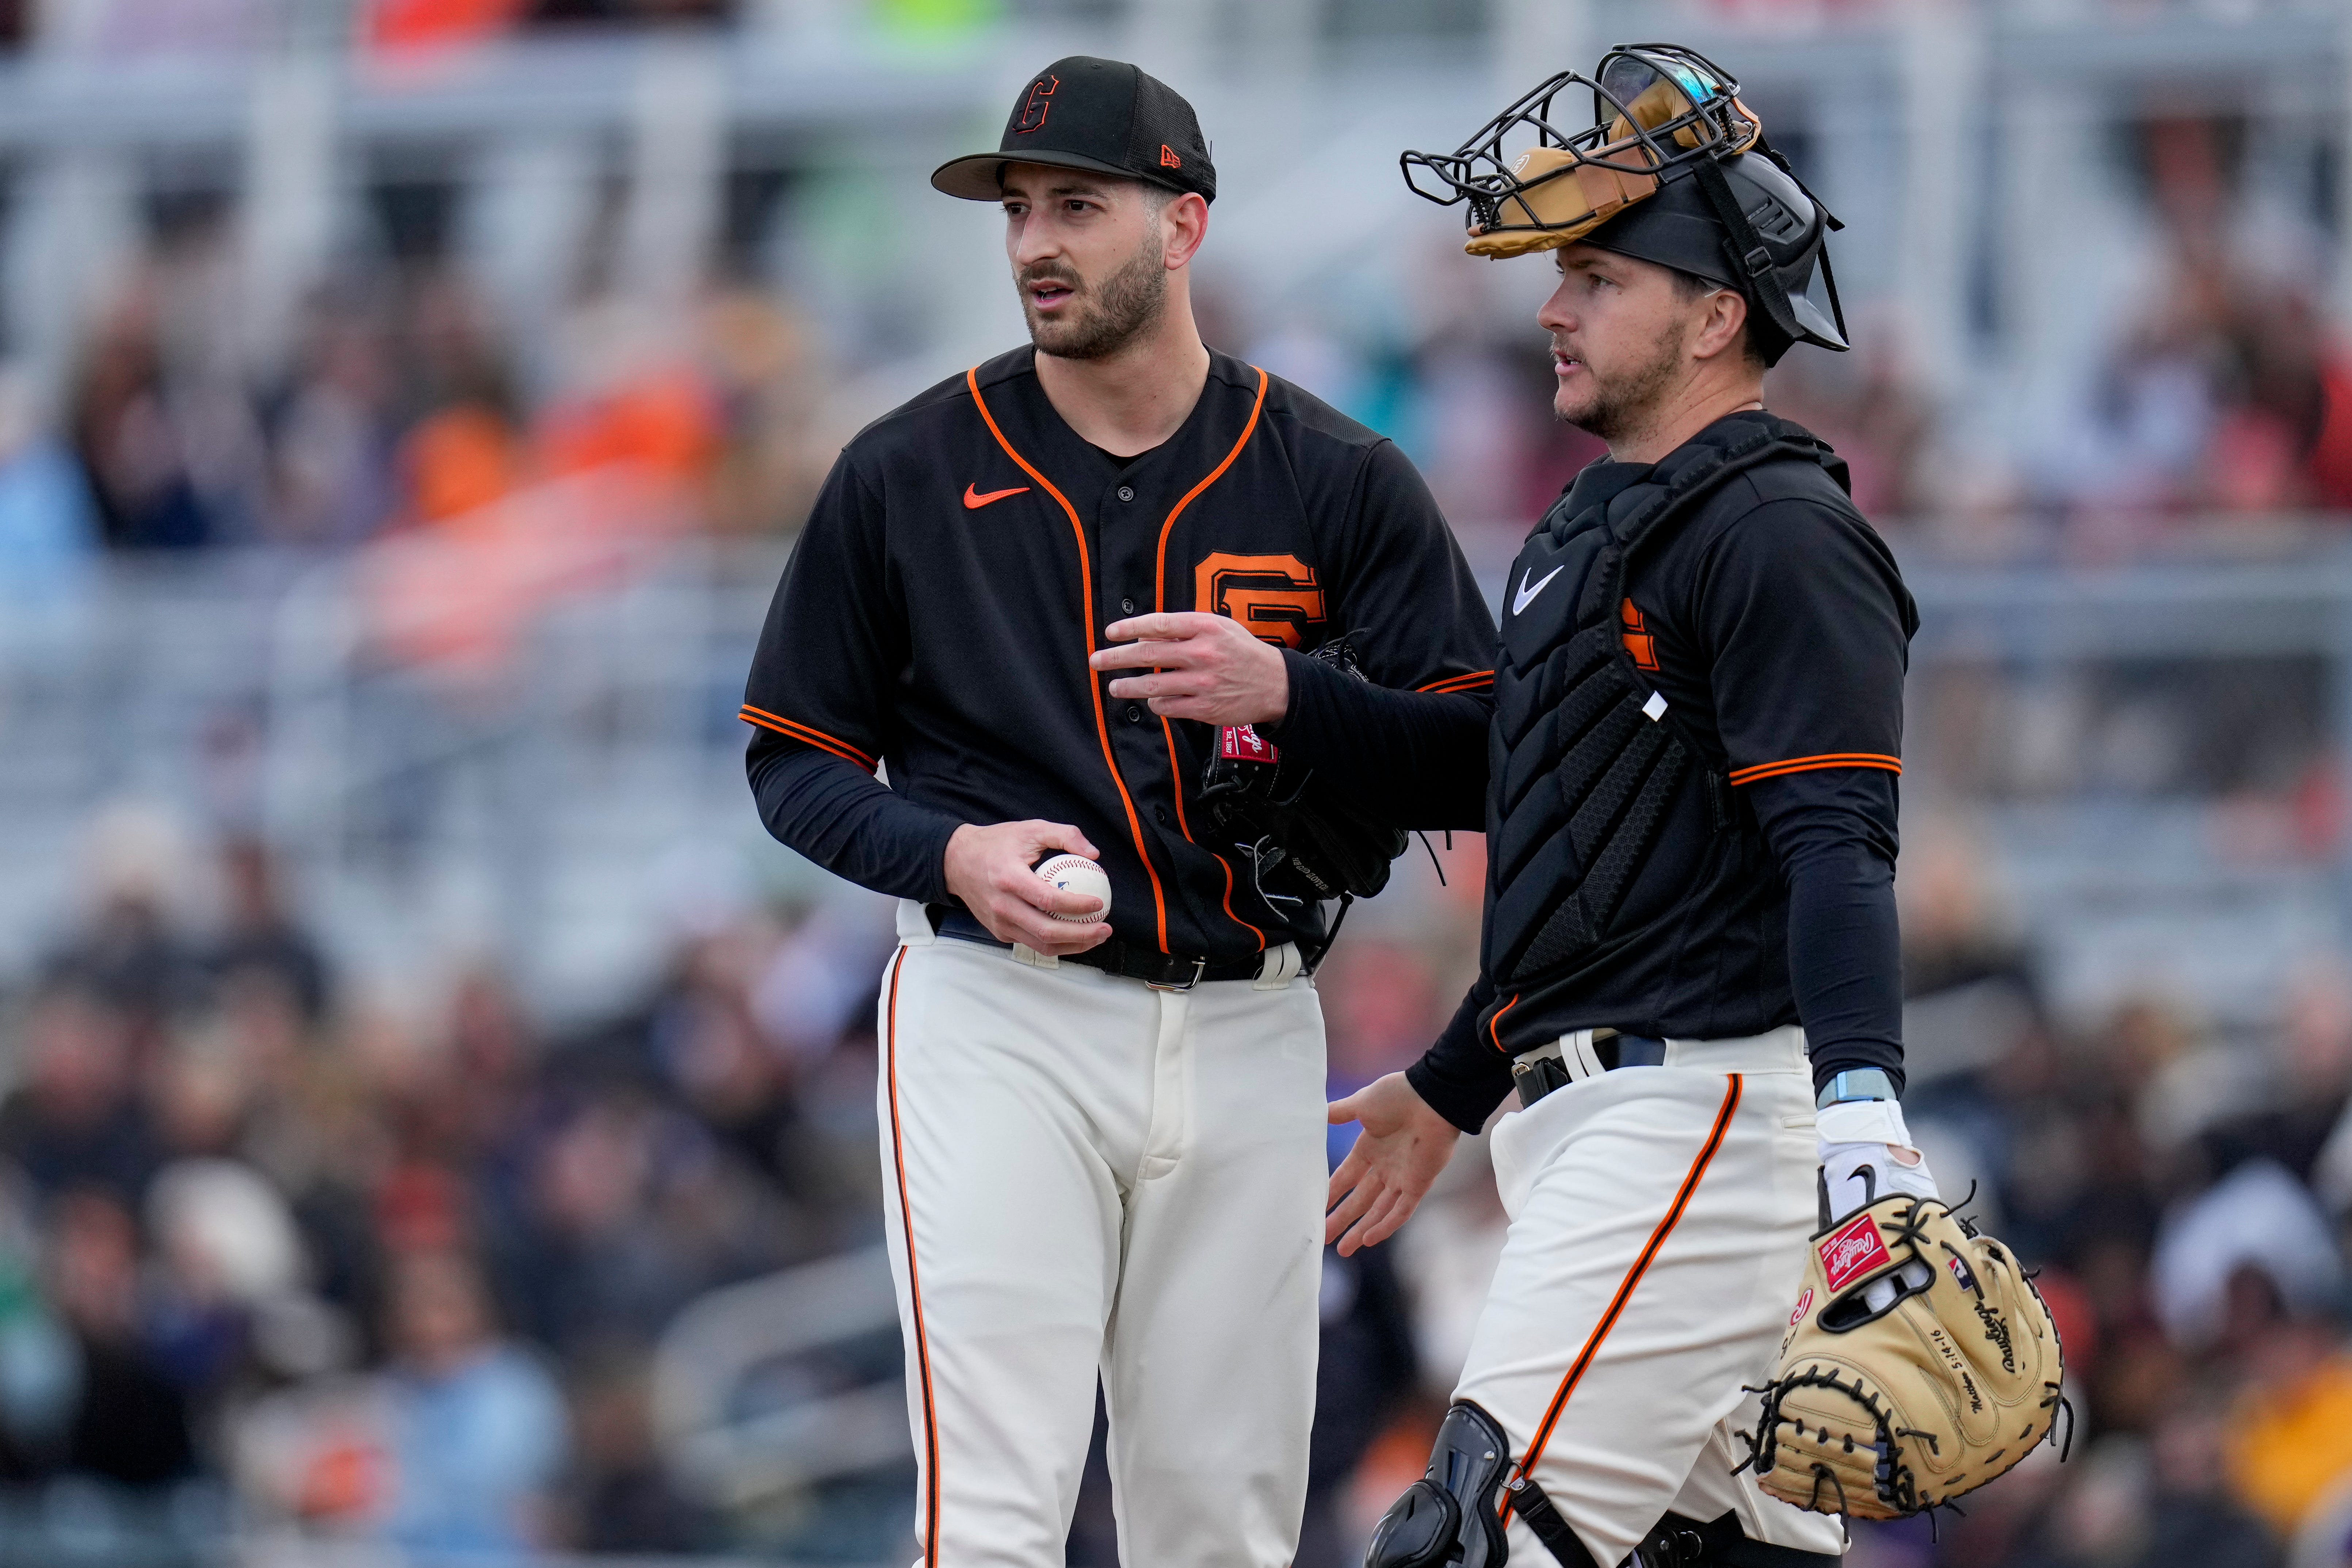 SF Giants pitcher Thomas Szapucki is visited at the mound by catcher Patrick Bailey in the sixth inning of the MLB Cactus League spring training game. (2023)